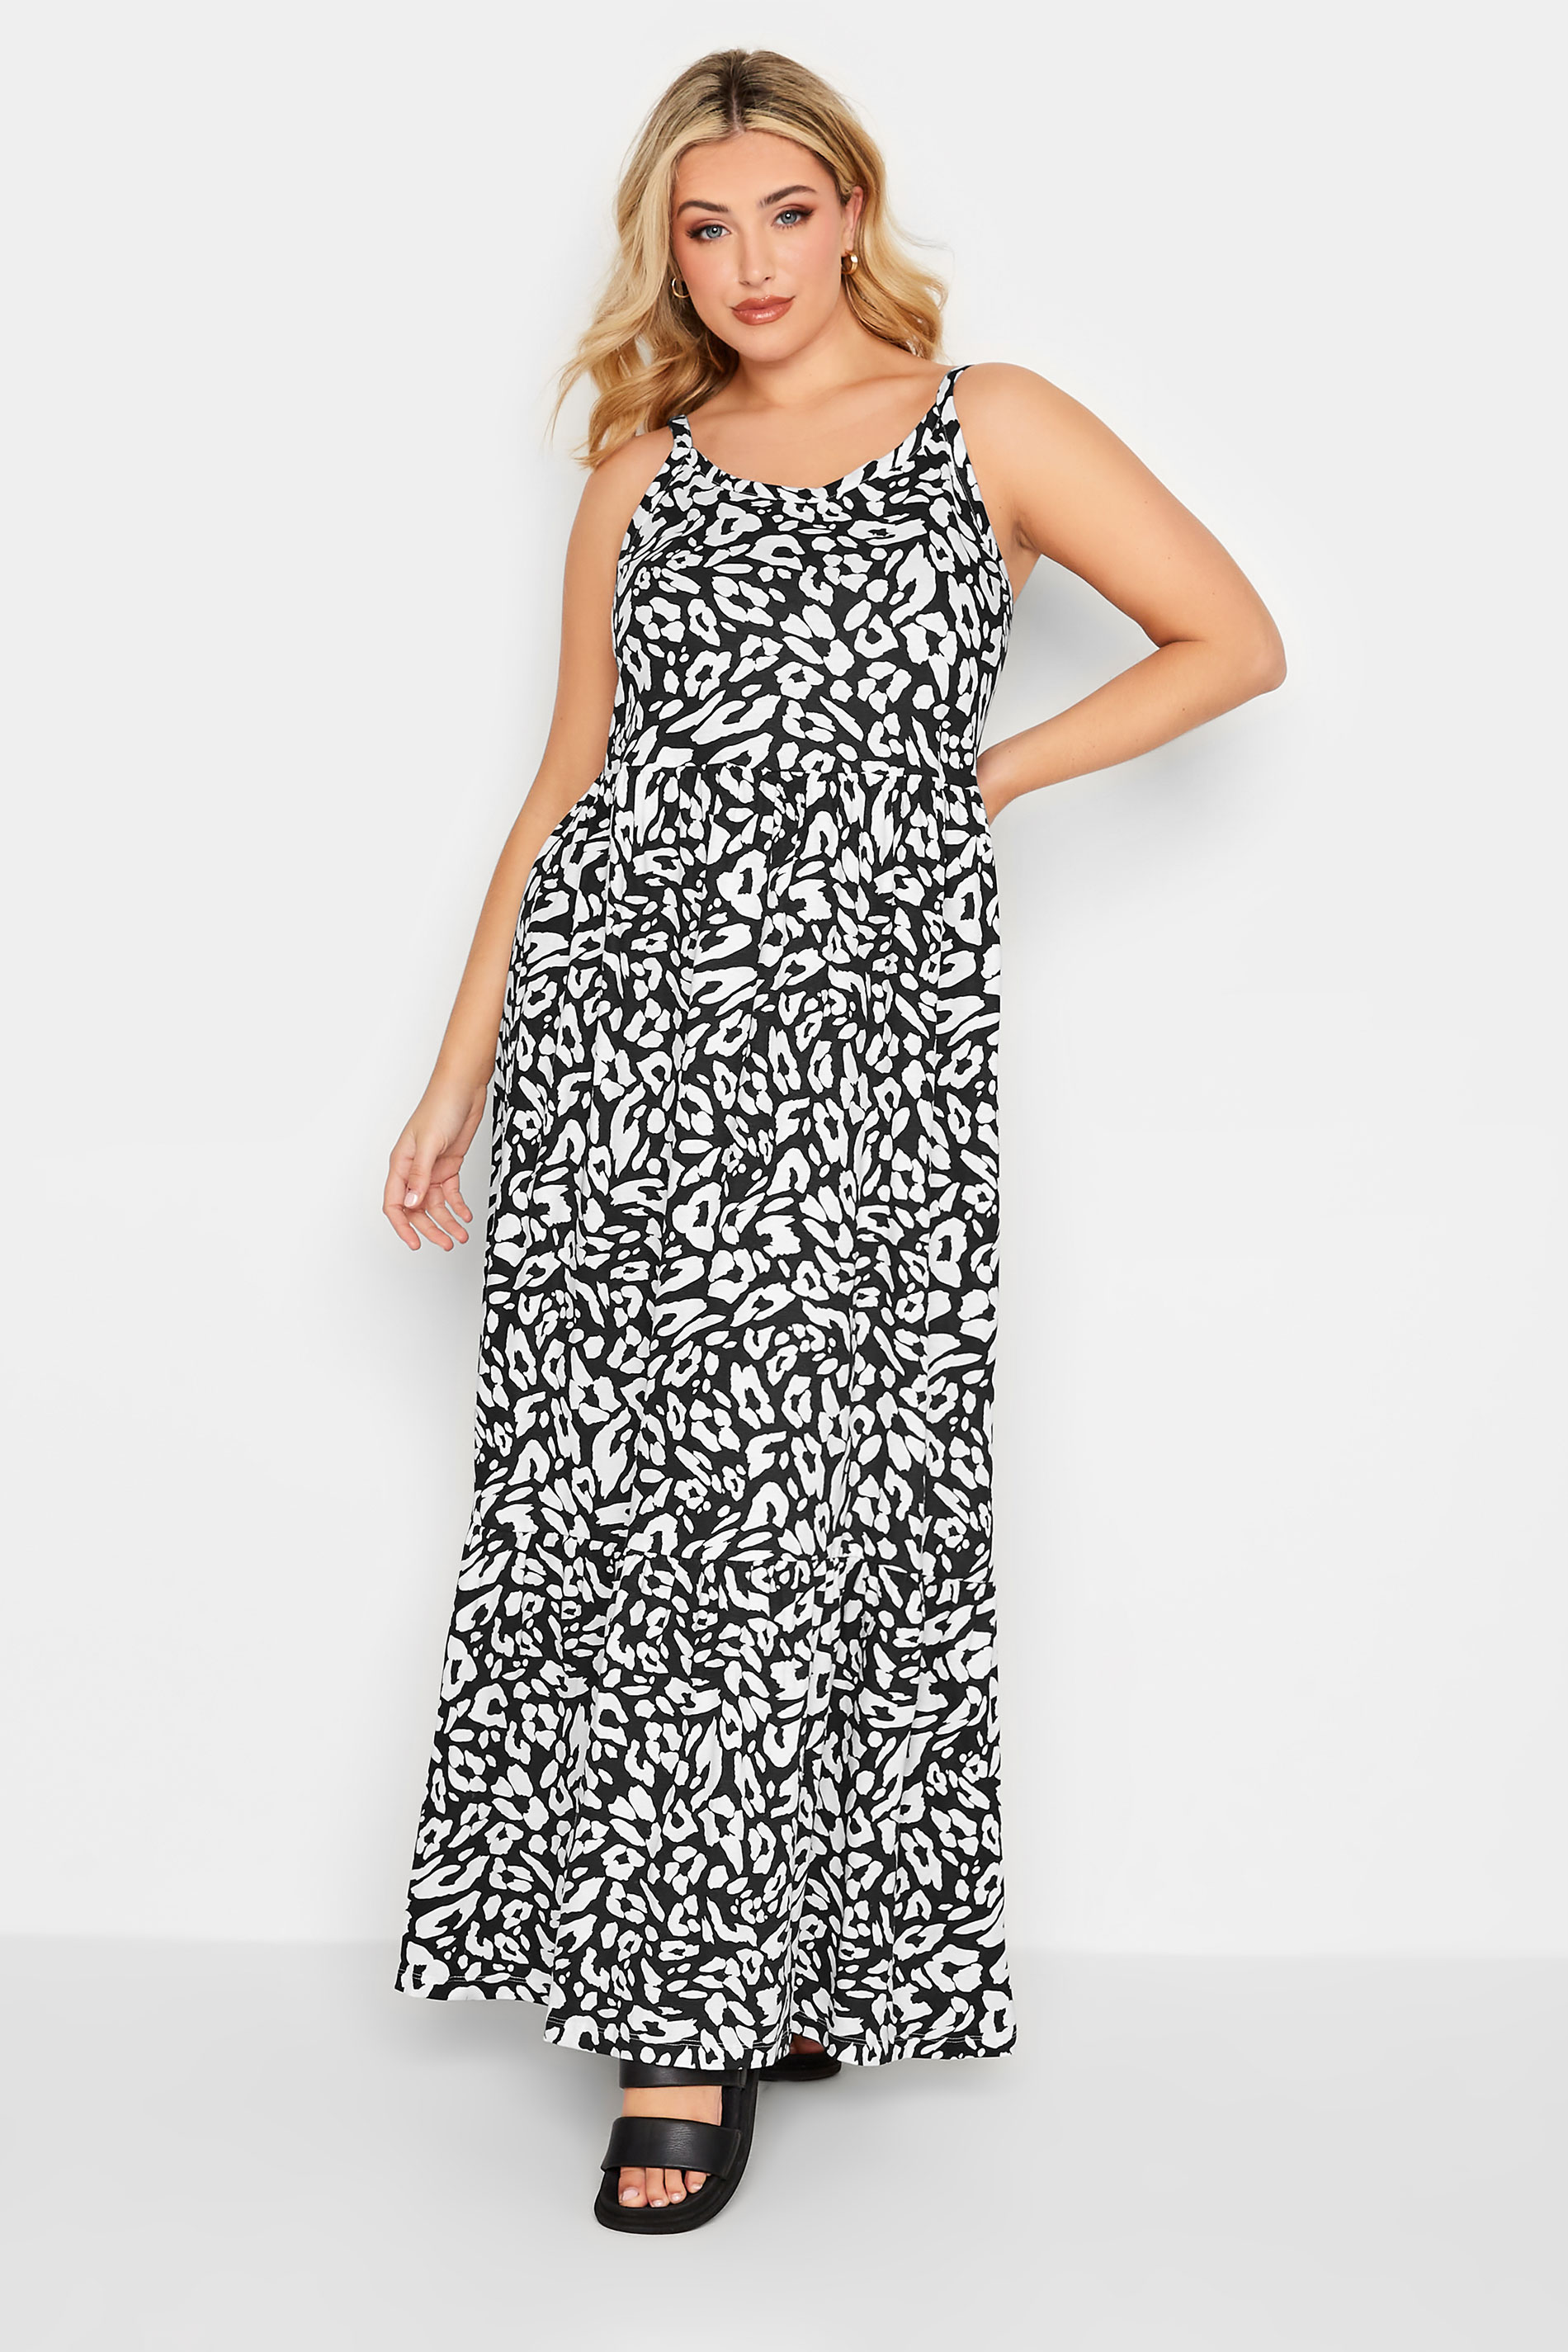 YOURS Curve Plus Size Black Leopard Print Tiered Maxi Sundress | Yours ...